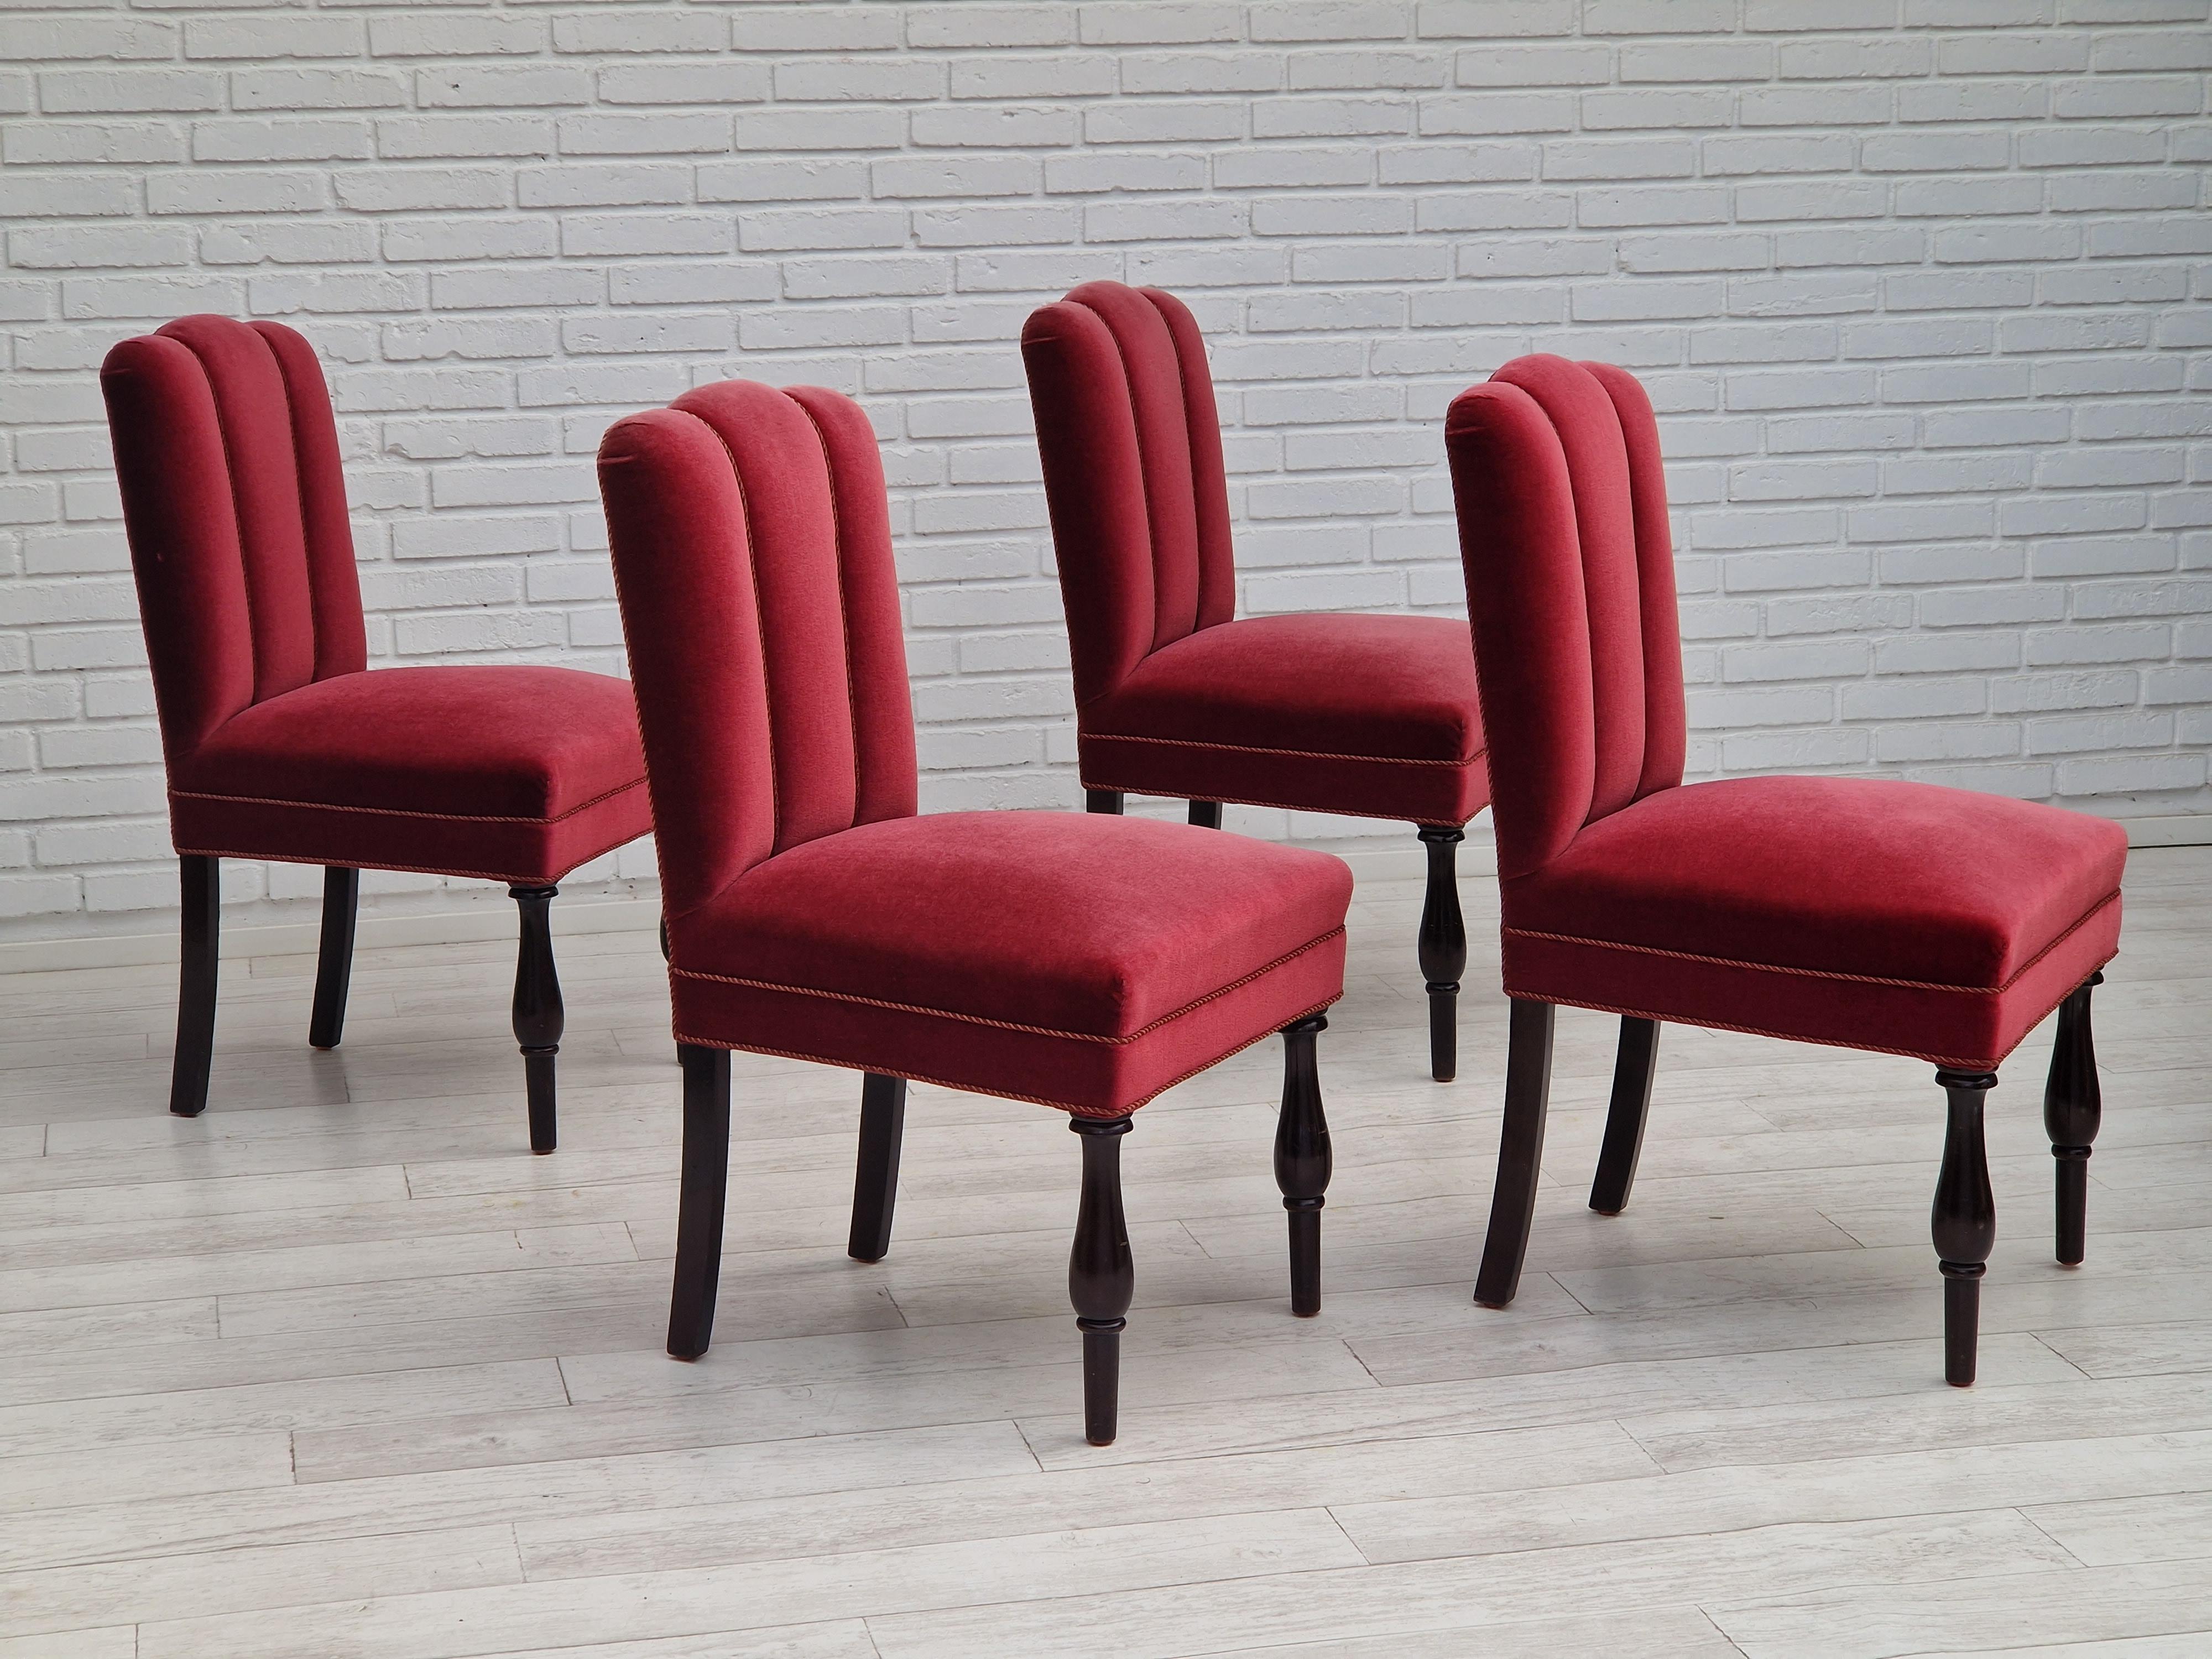 Original Danish design from about 1950s. Set of 4 dinning chairs, oak wood, cherry-red velour. Made by a Danish furniture manufacturer in about 1950. Very good condition, no smells, no stains. Springs in seat.